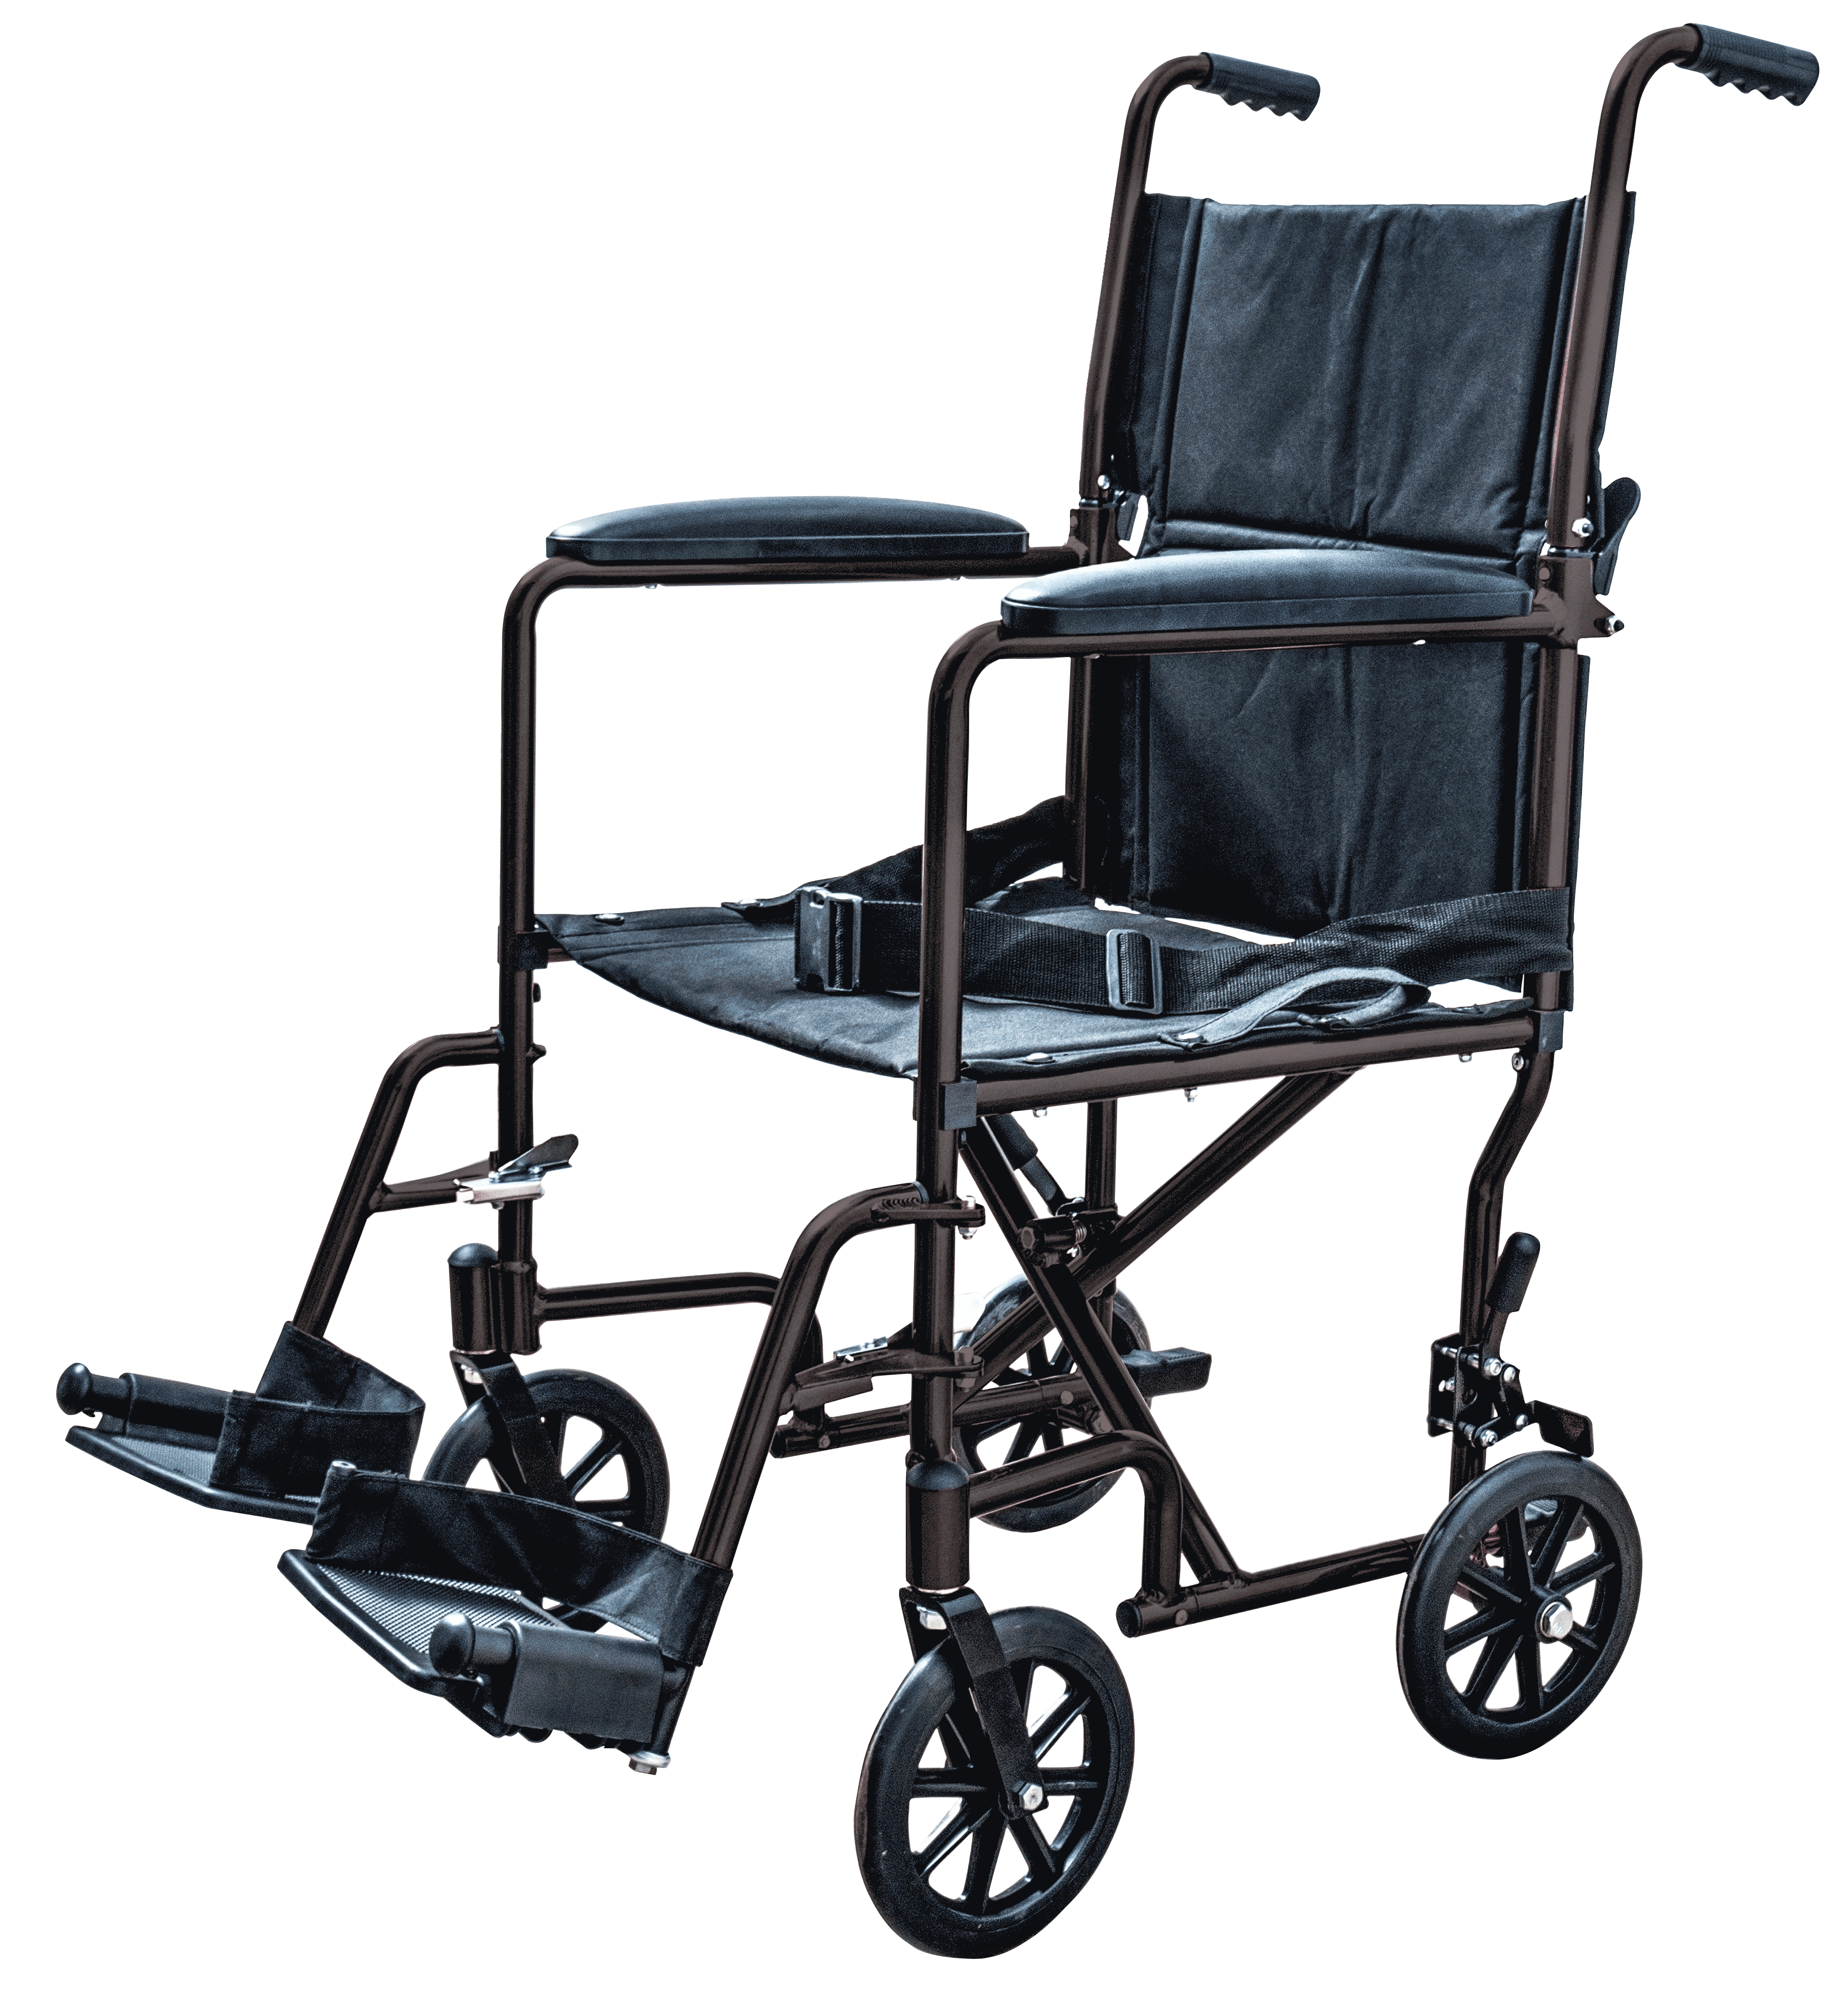 "Transport Chair with Swing Away Foot Rest 19"" Width, Aluminum, Black"